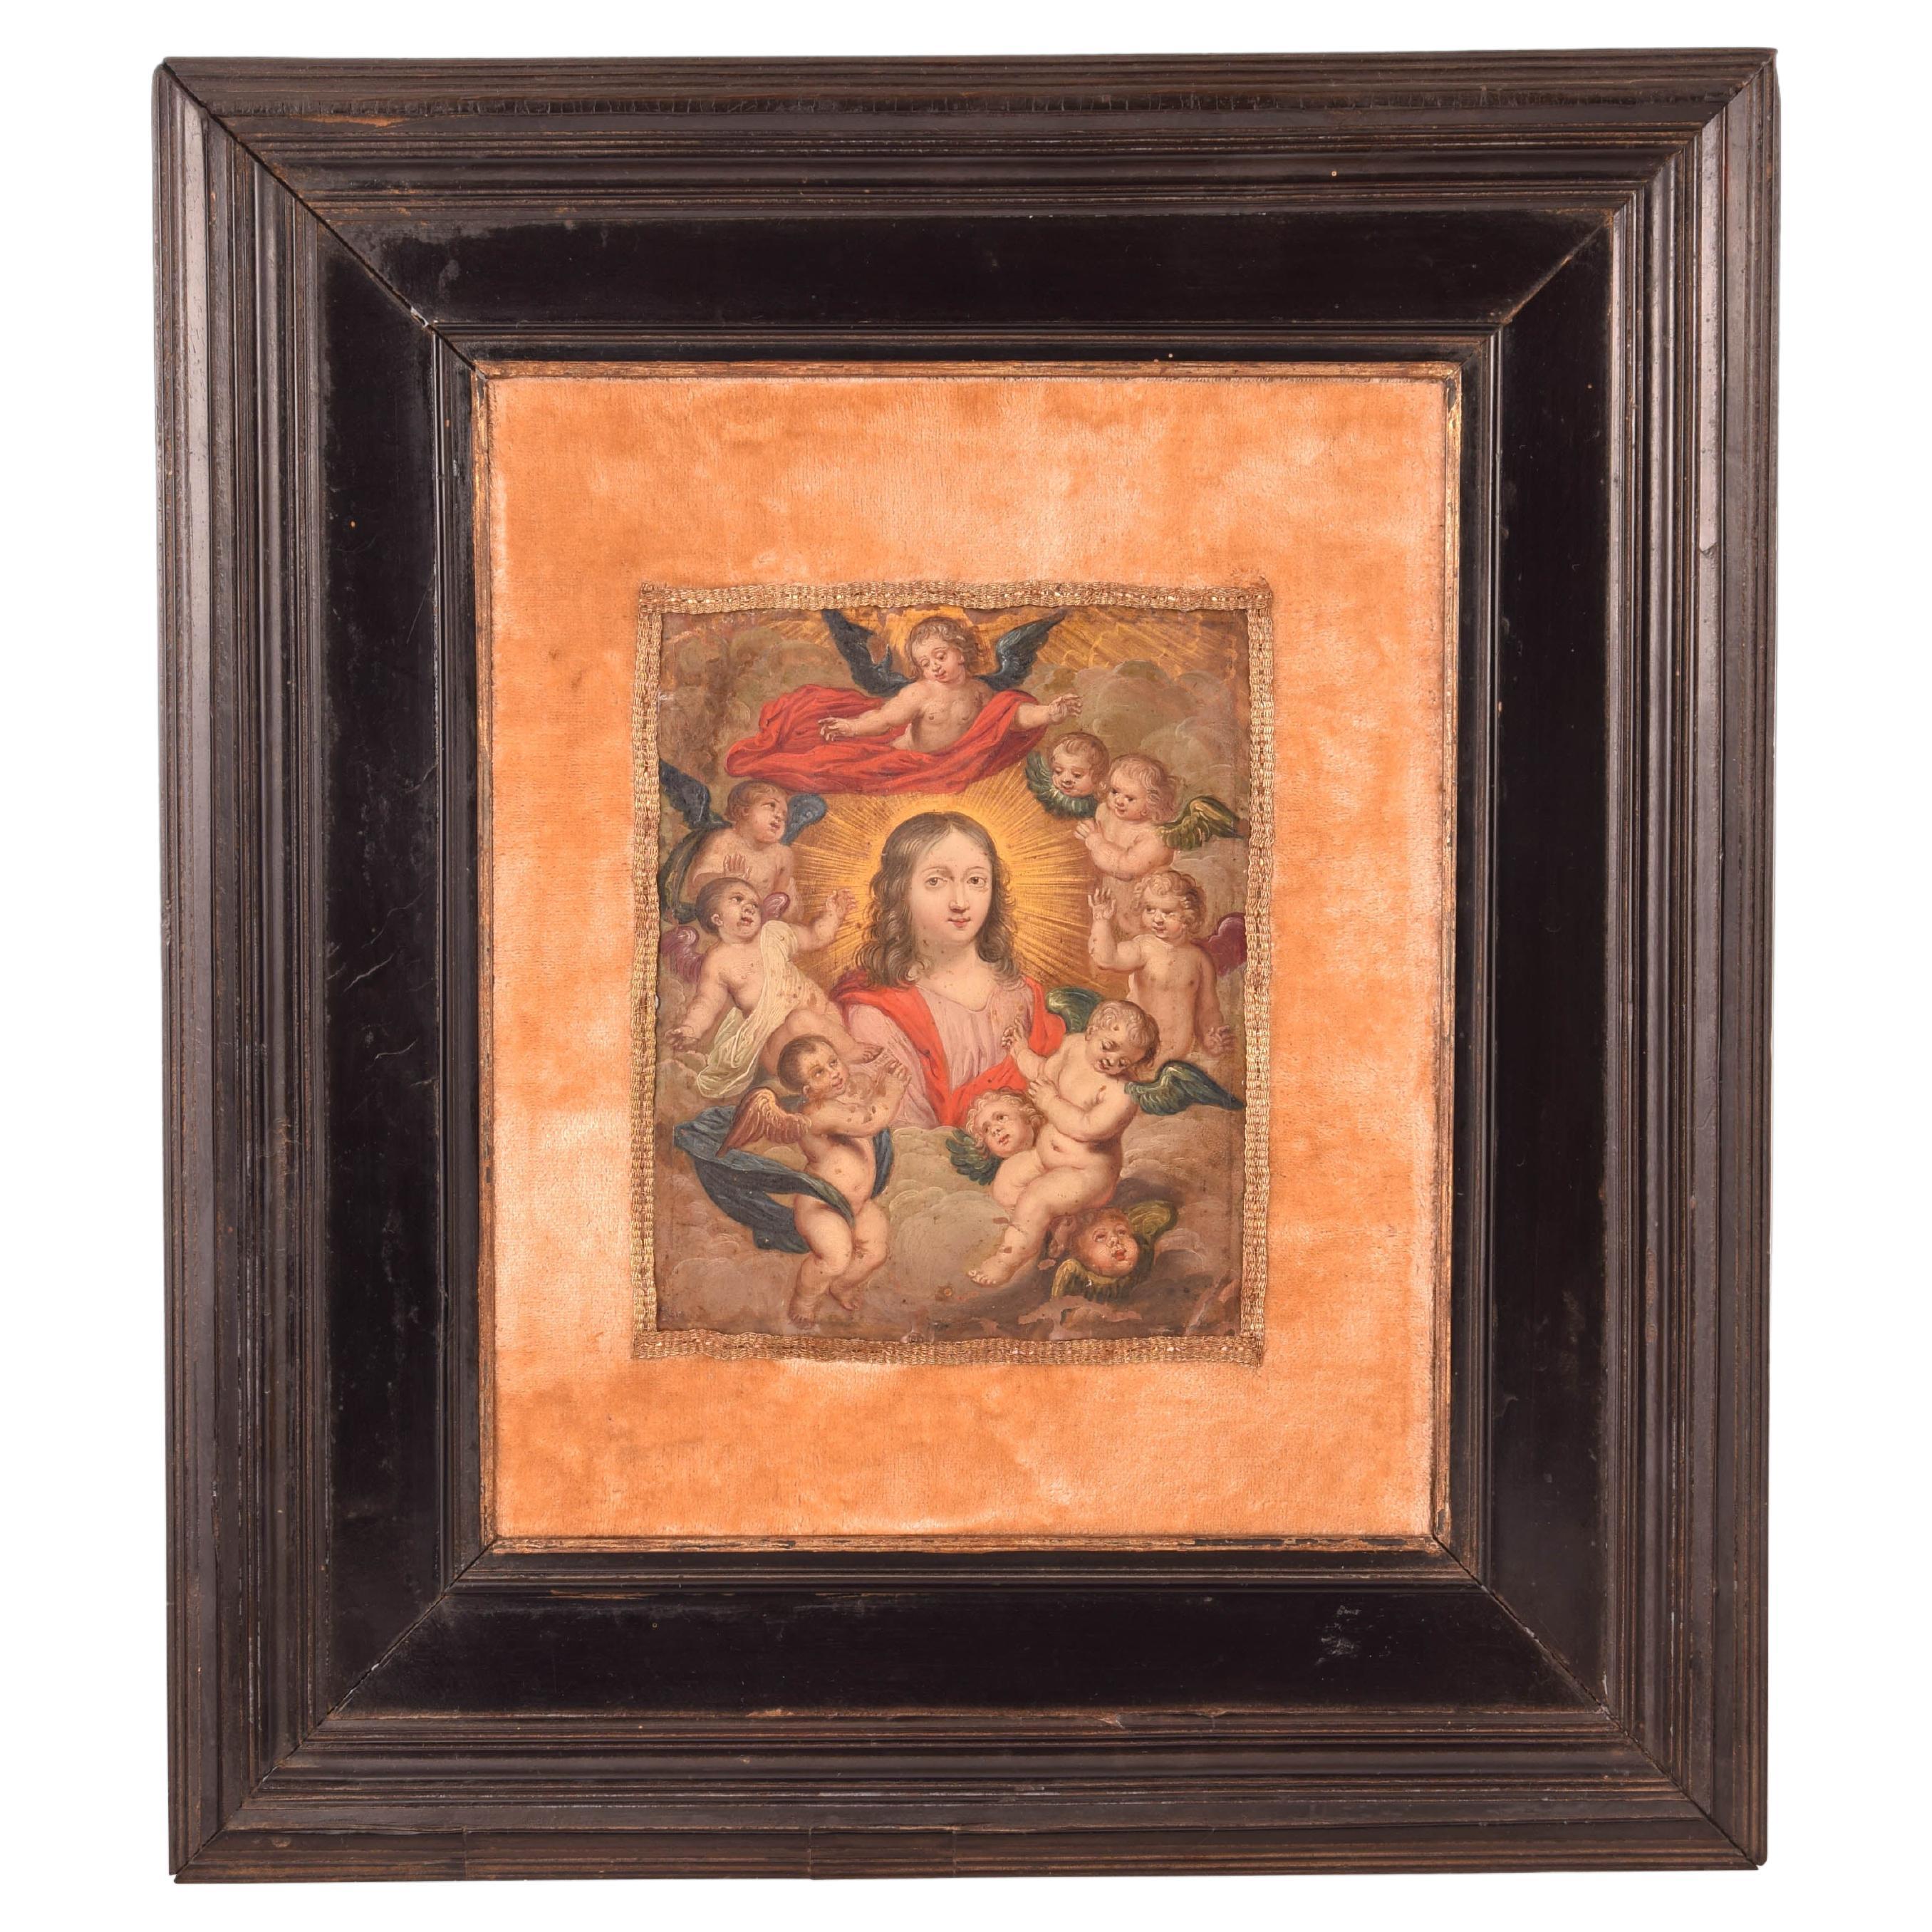 Christ with angels. Possibly Flemish school, 17th century. For Sale